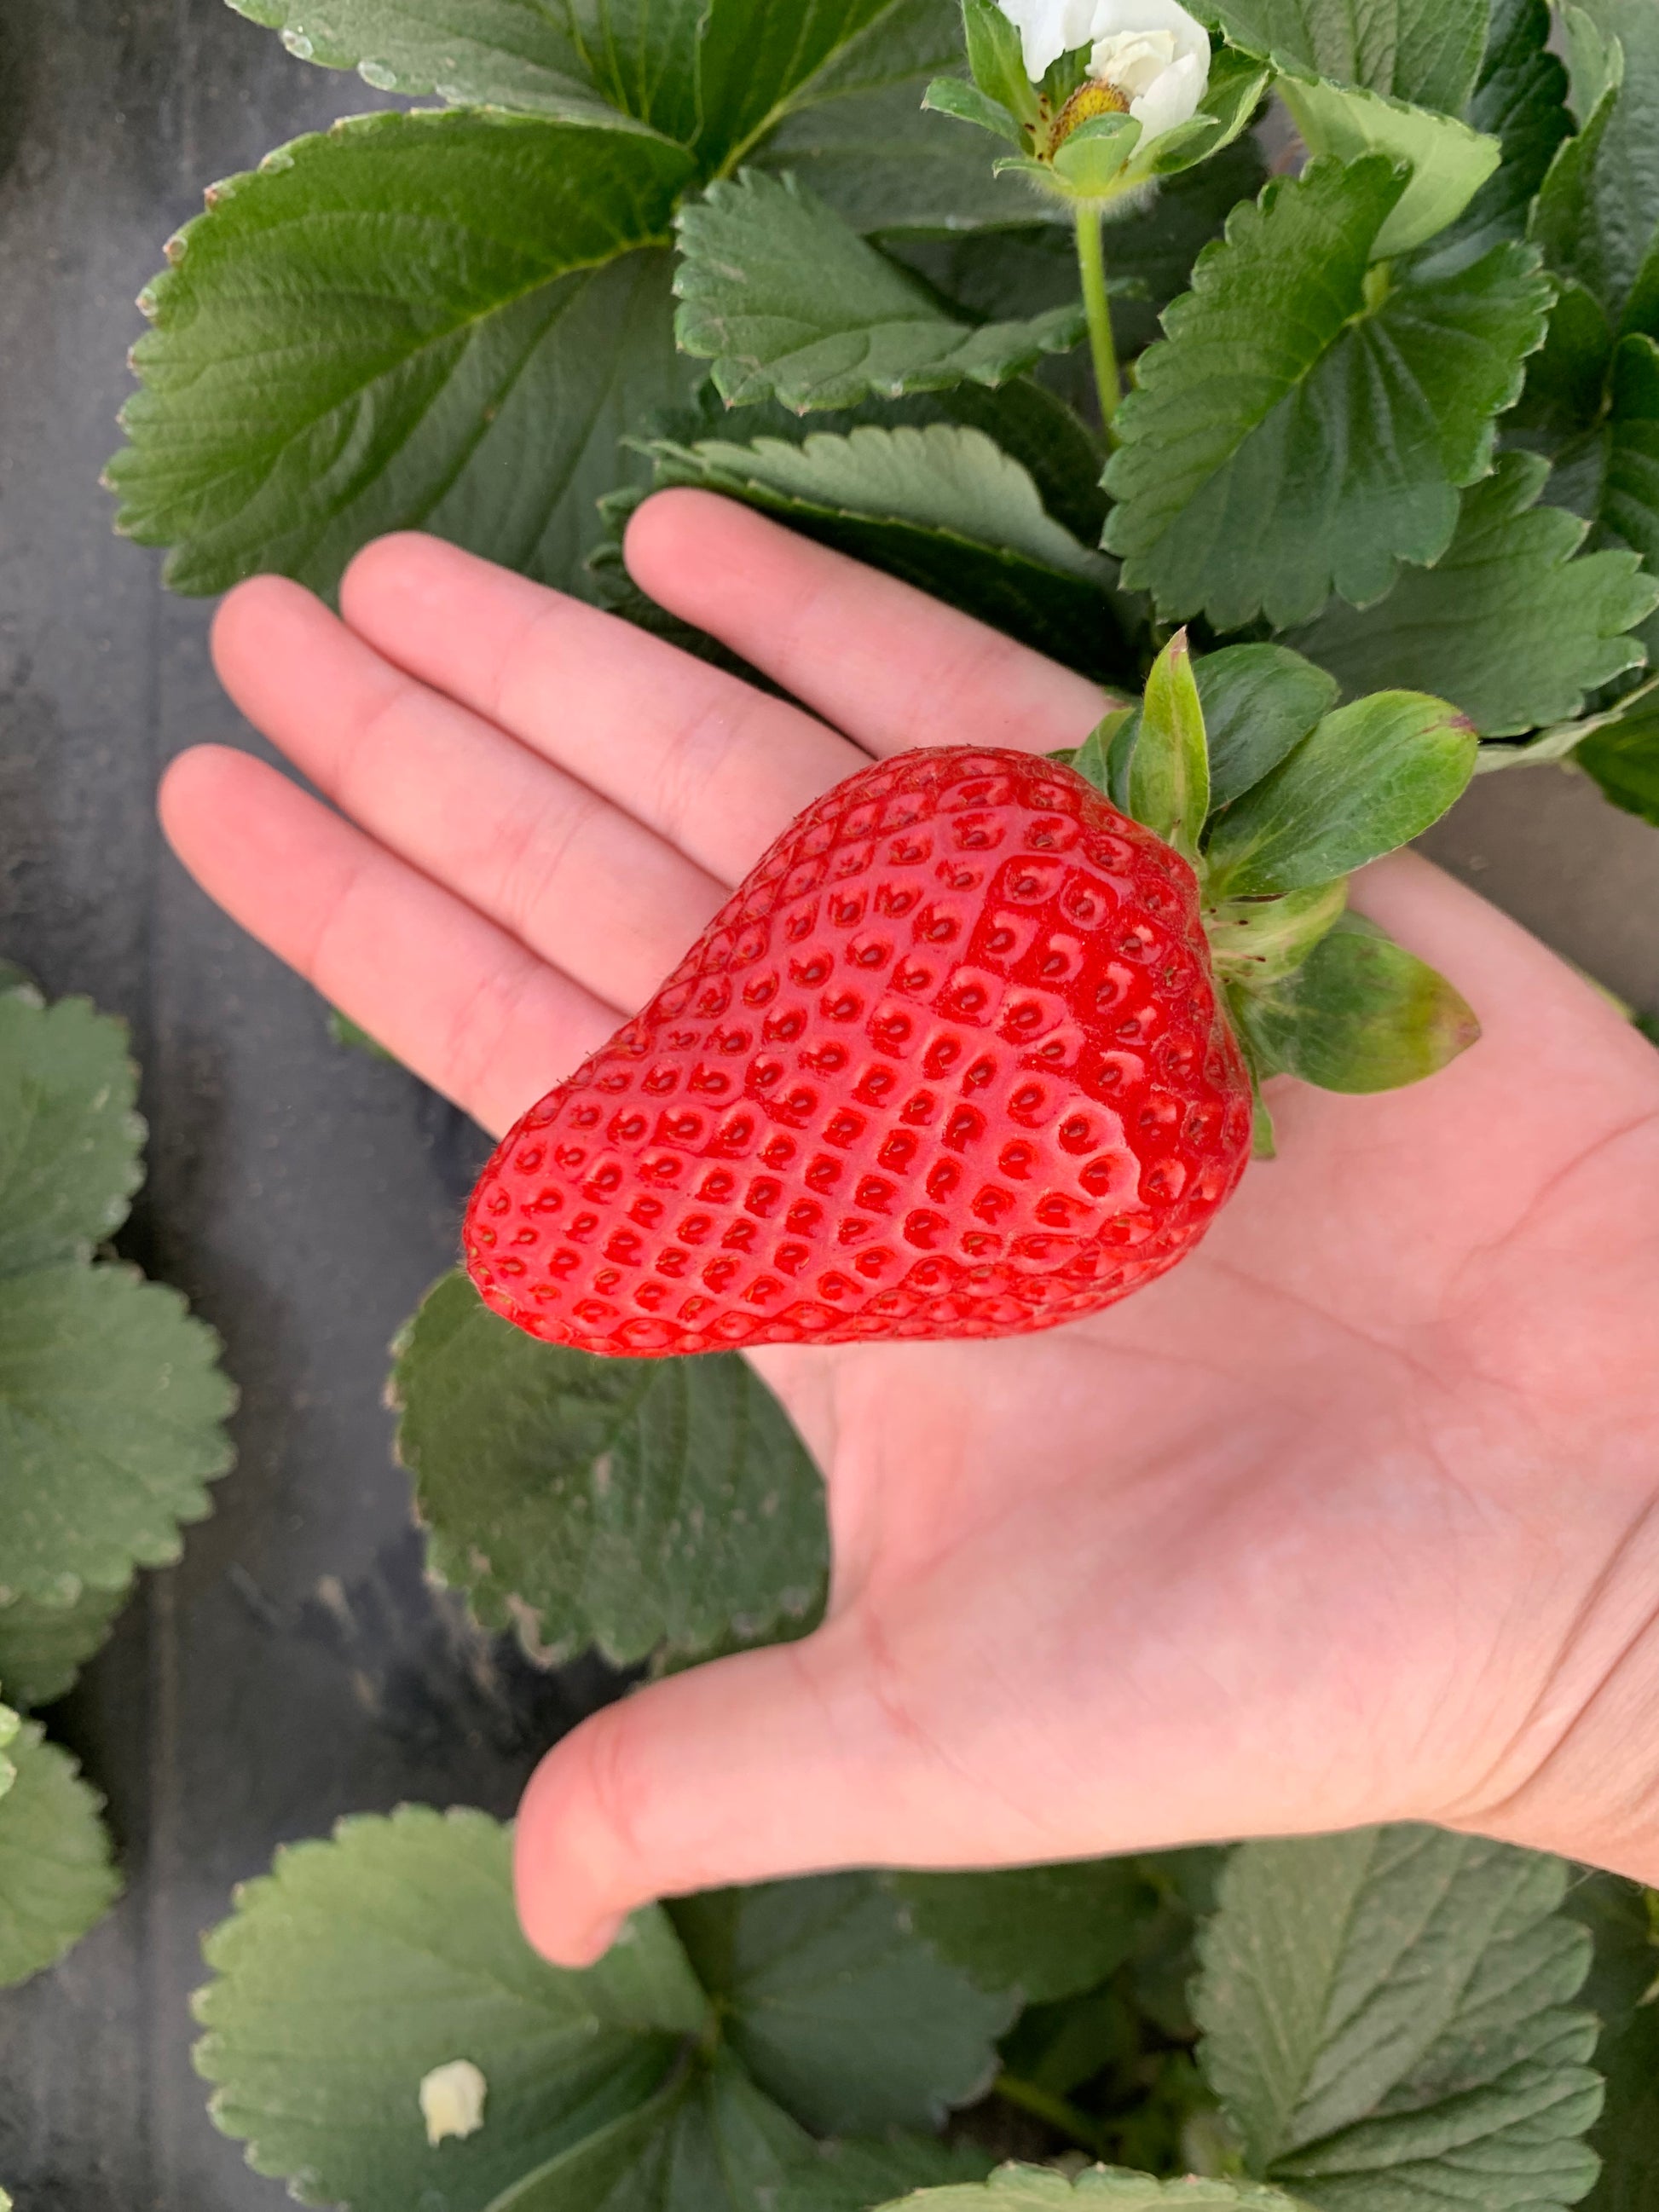 A gigantic perfectly formed strawberry in the palm of someone's hand.  The single berry fills the entire palm!